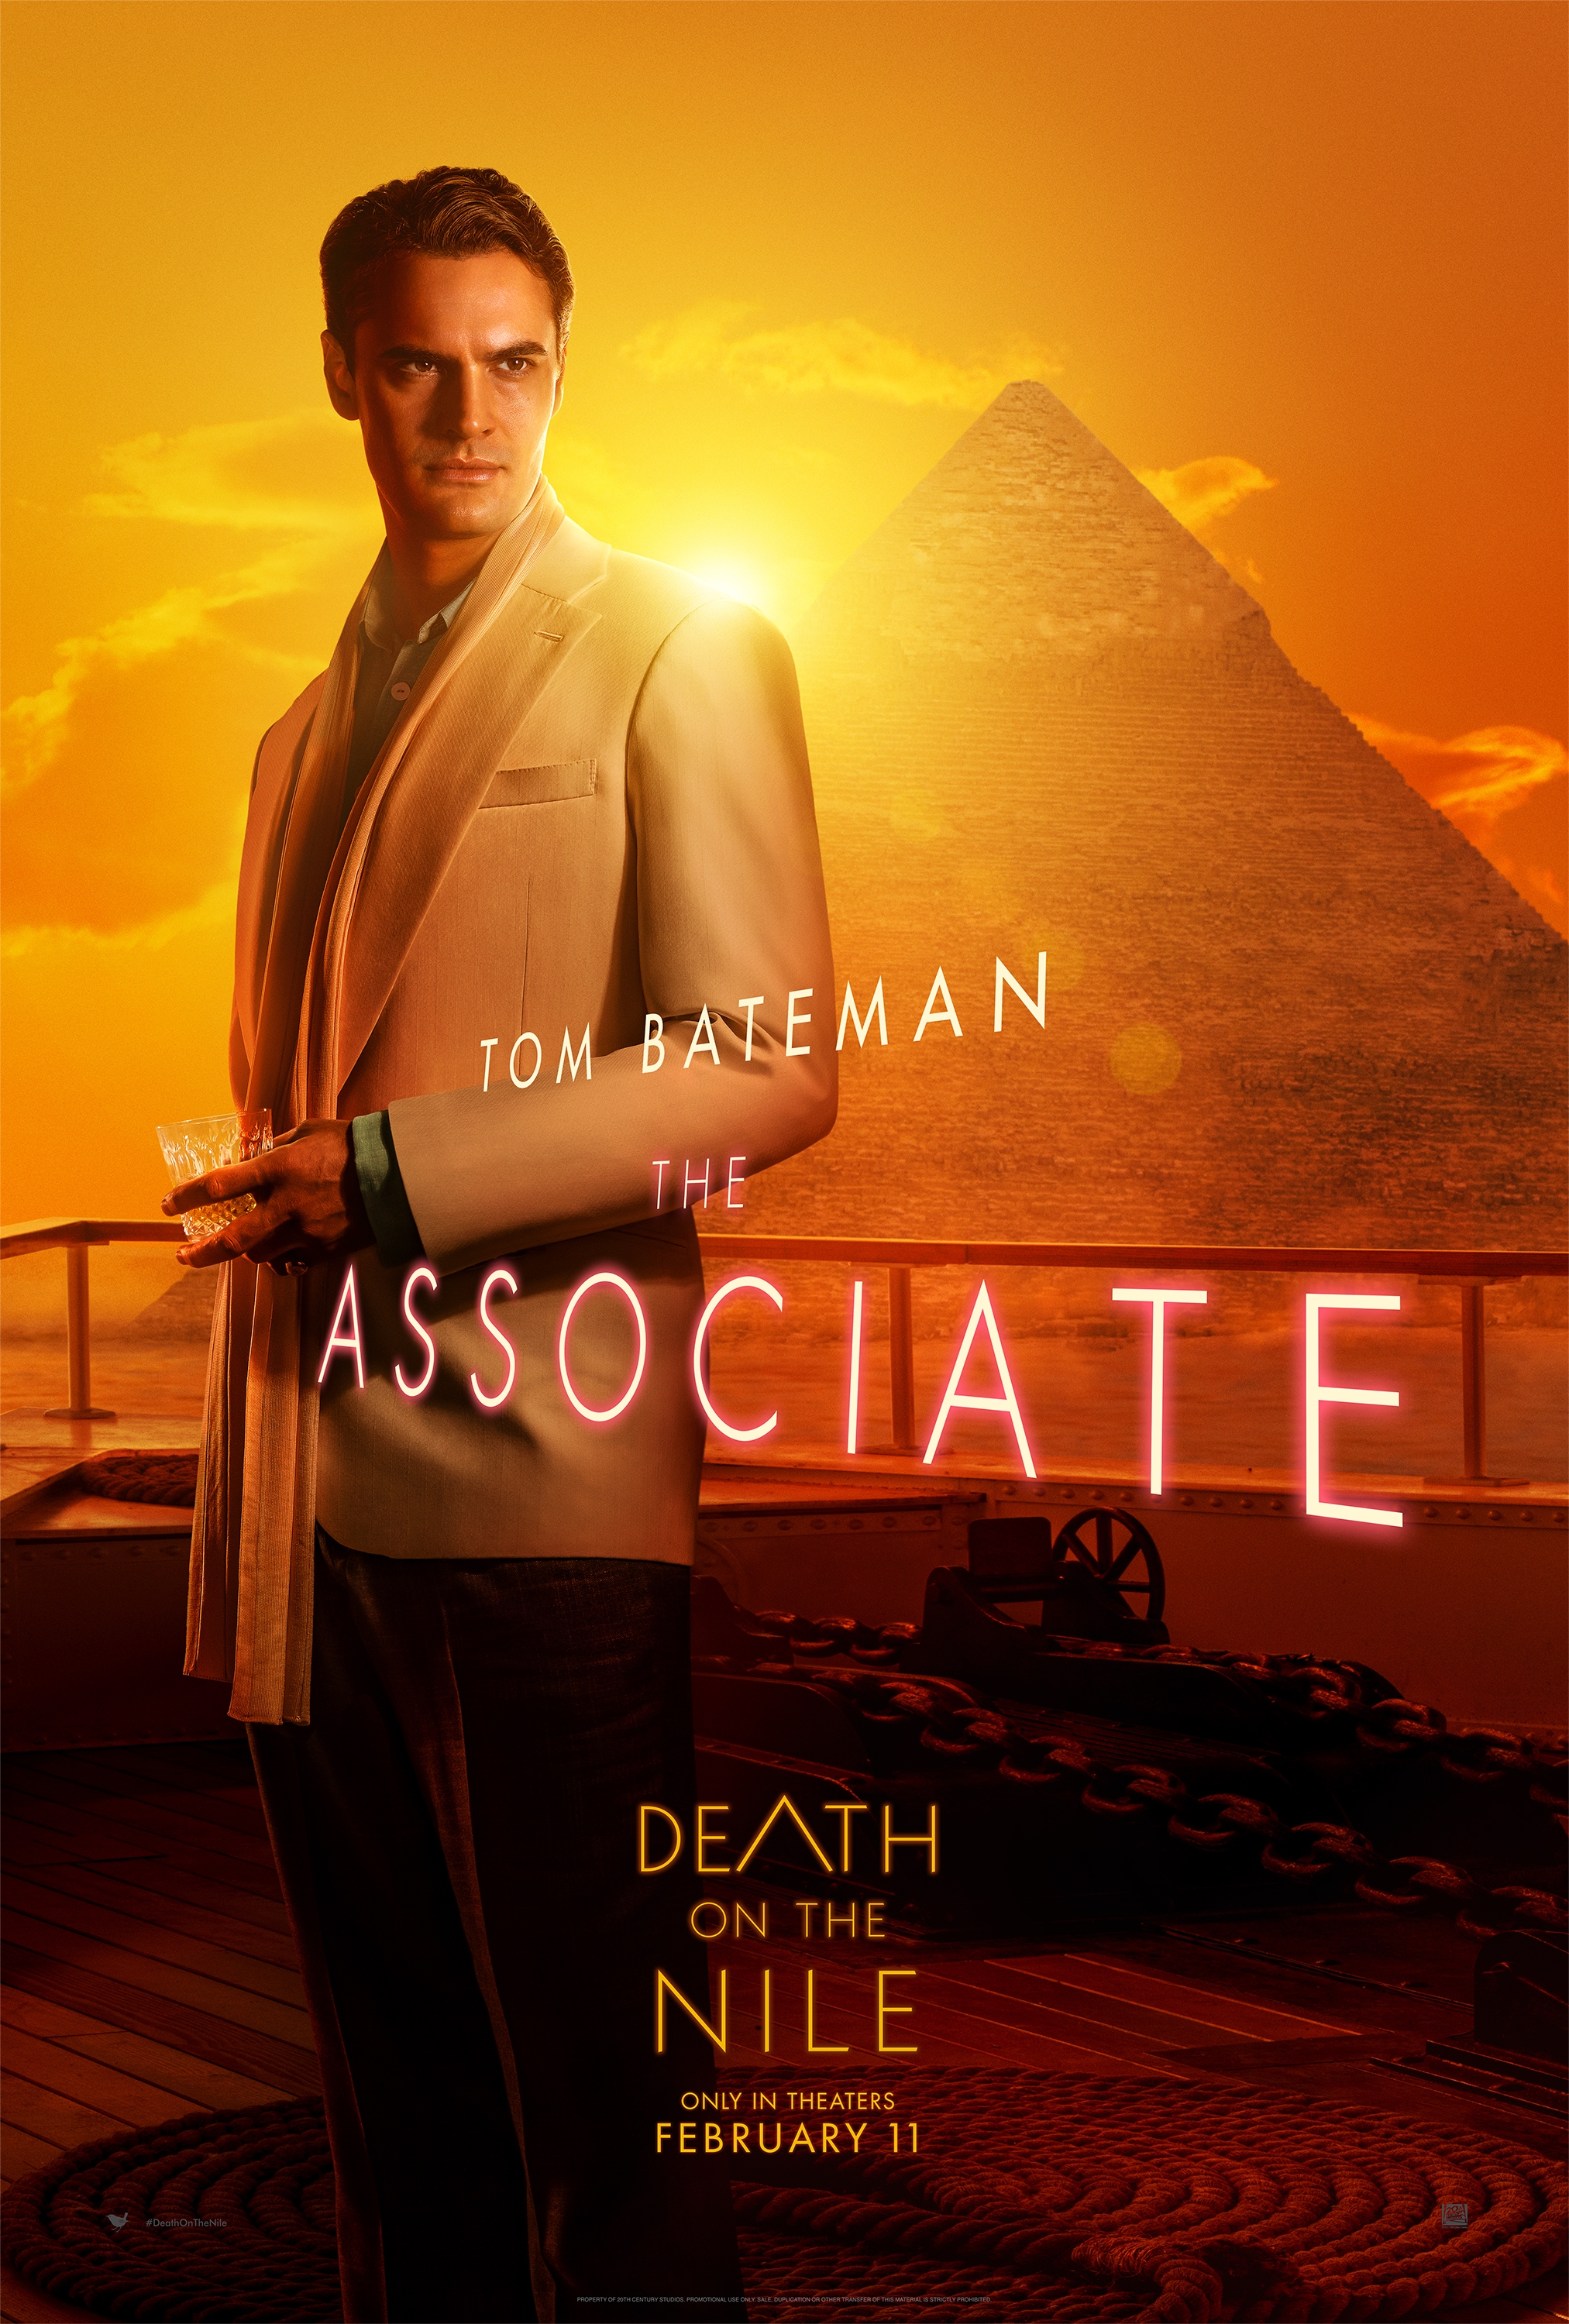  Death on the Nile | Tom Bateman (Character Poster)